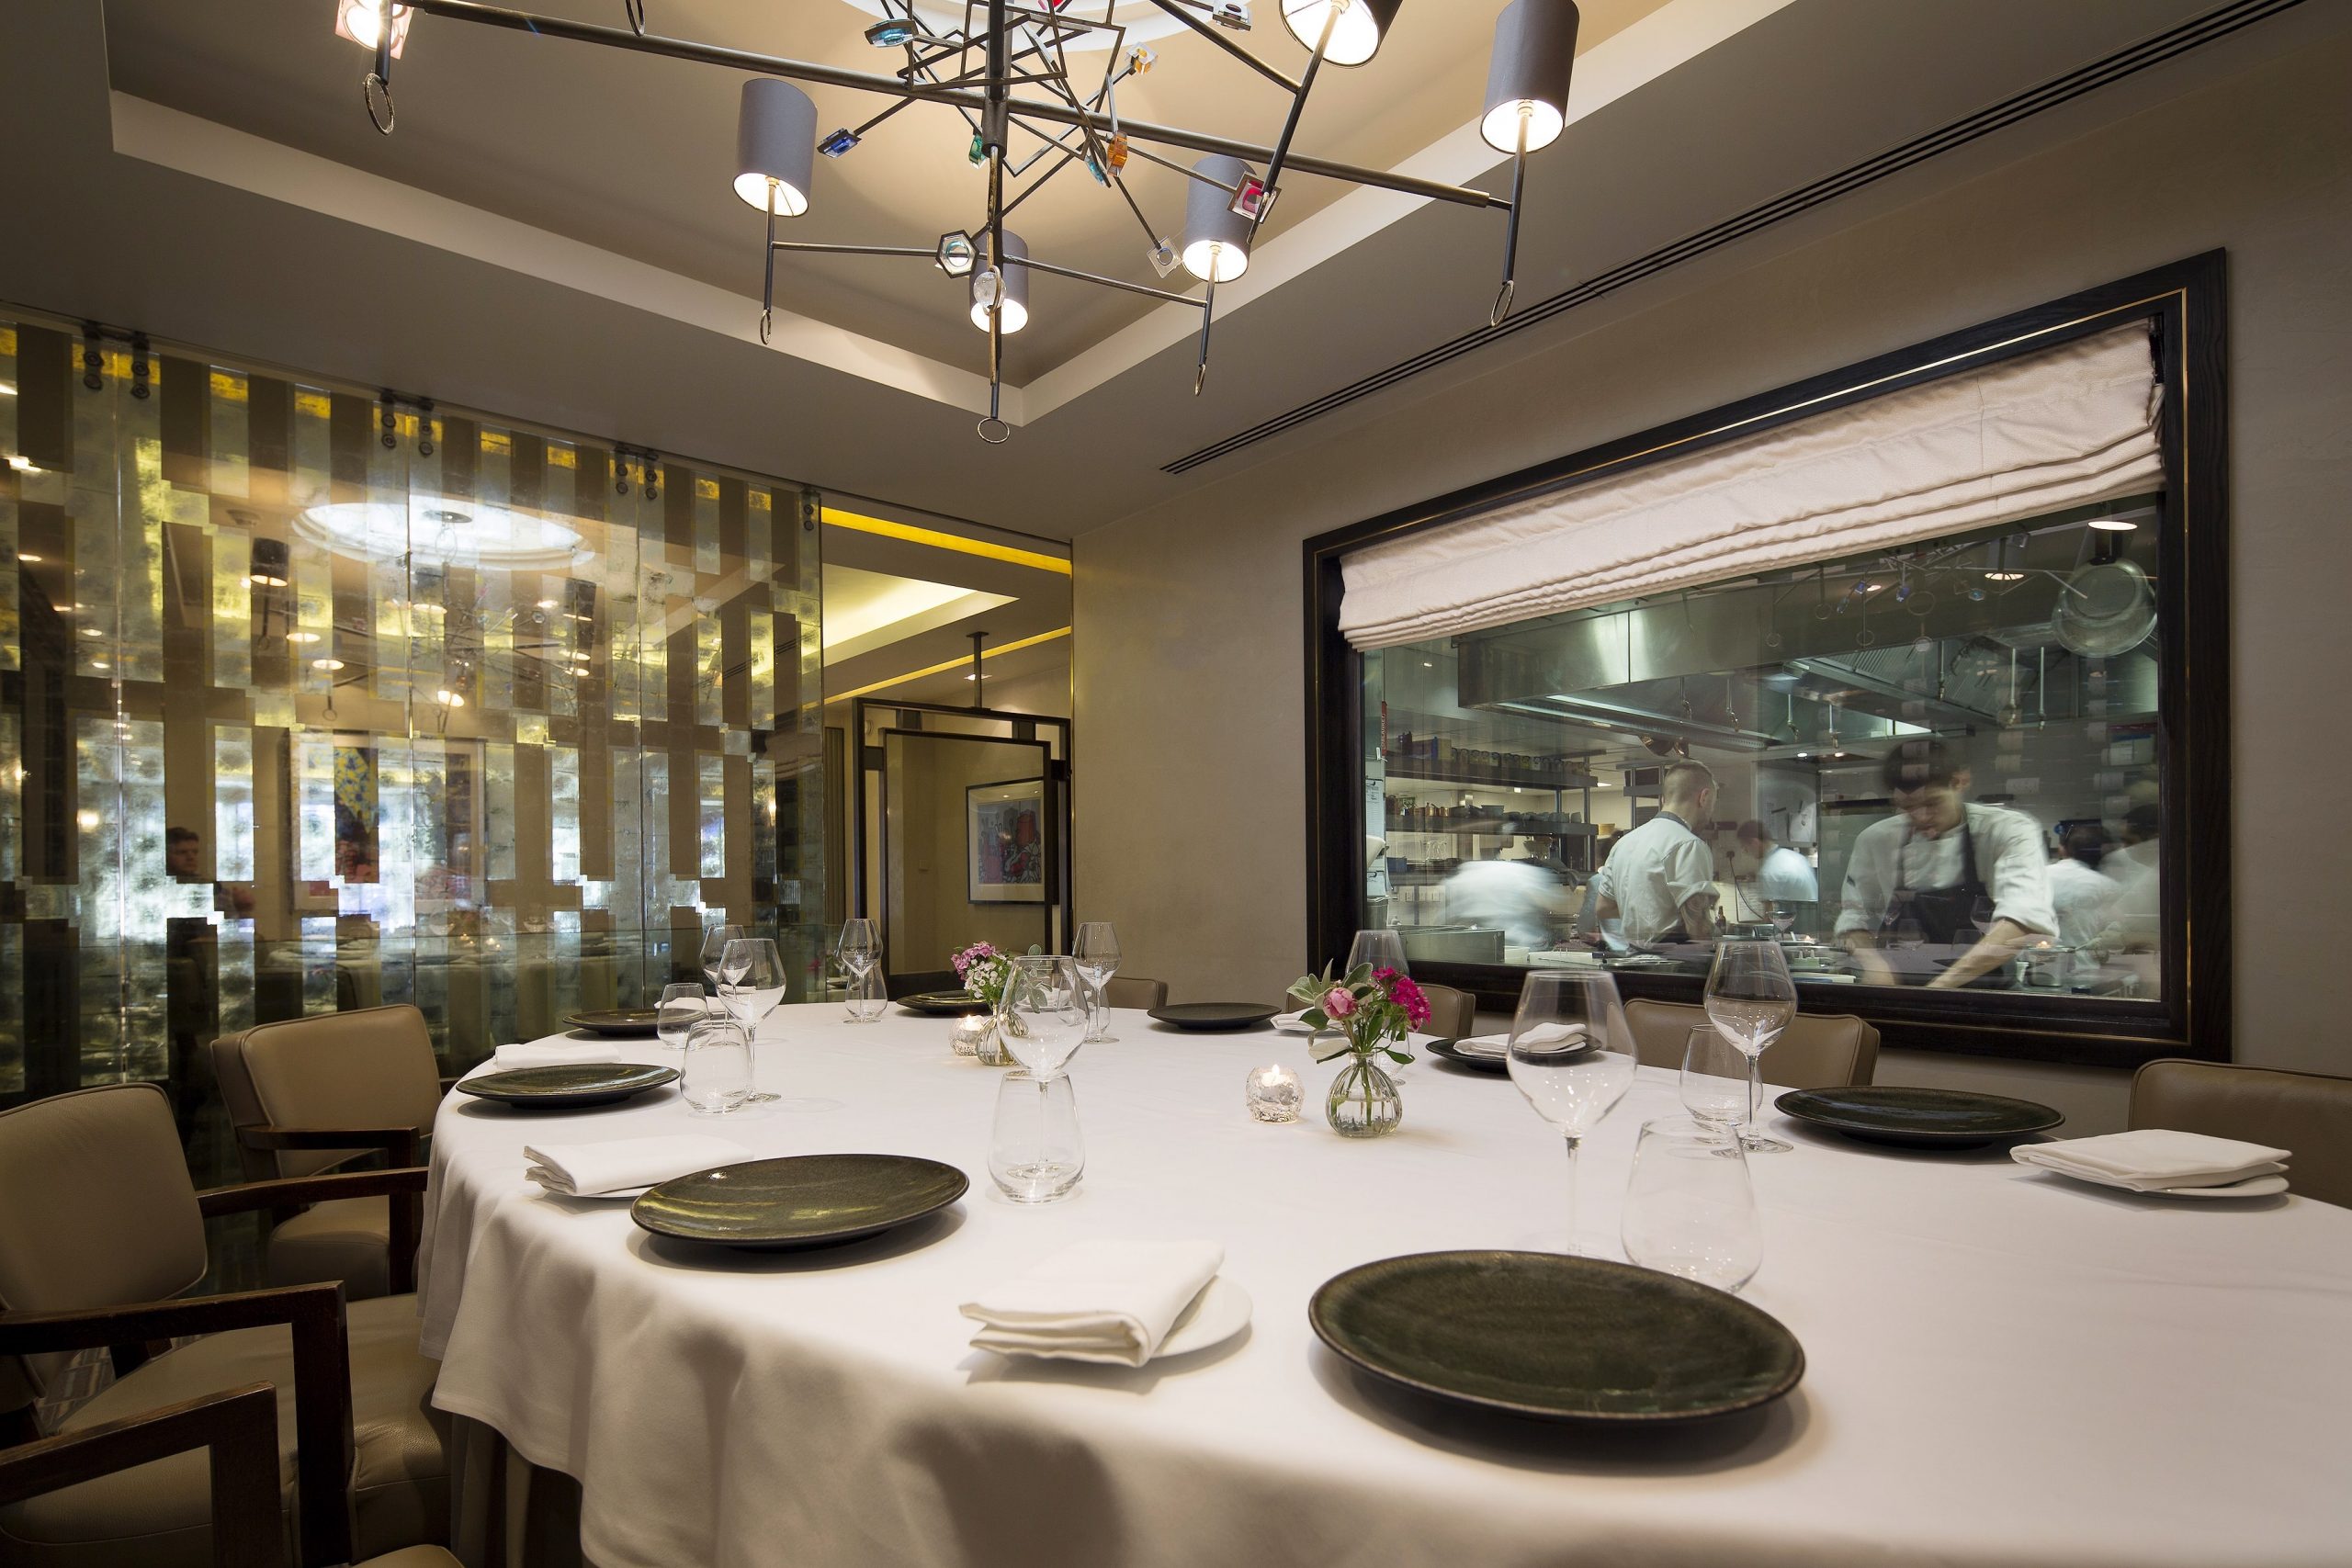 Murano By Angela Hartnett Private Dining Room Image View Of Chefs In Kitchen Through Glass Window Scaled